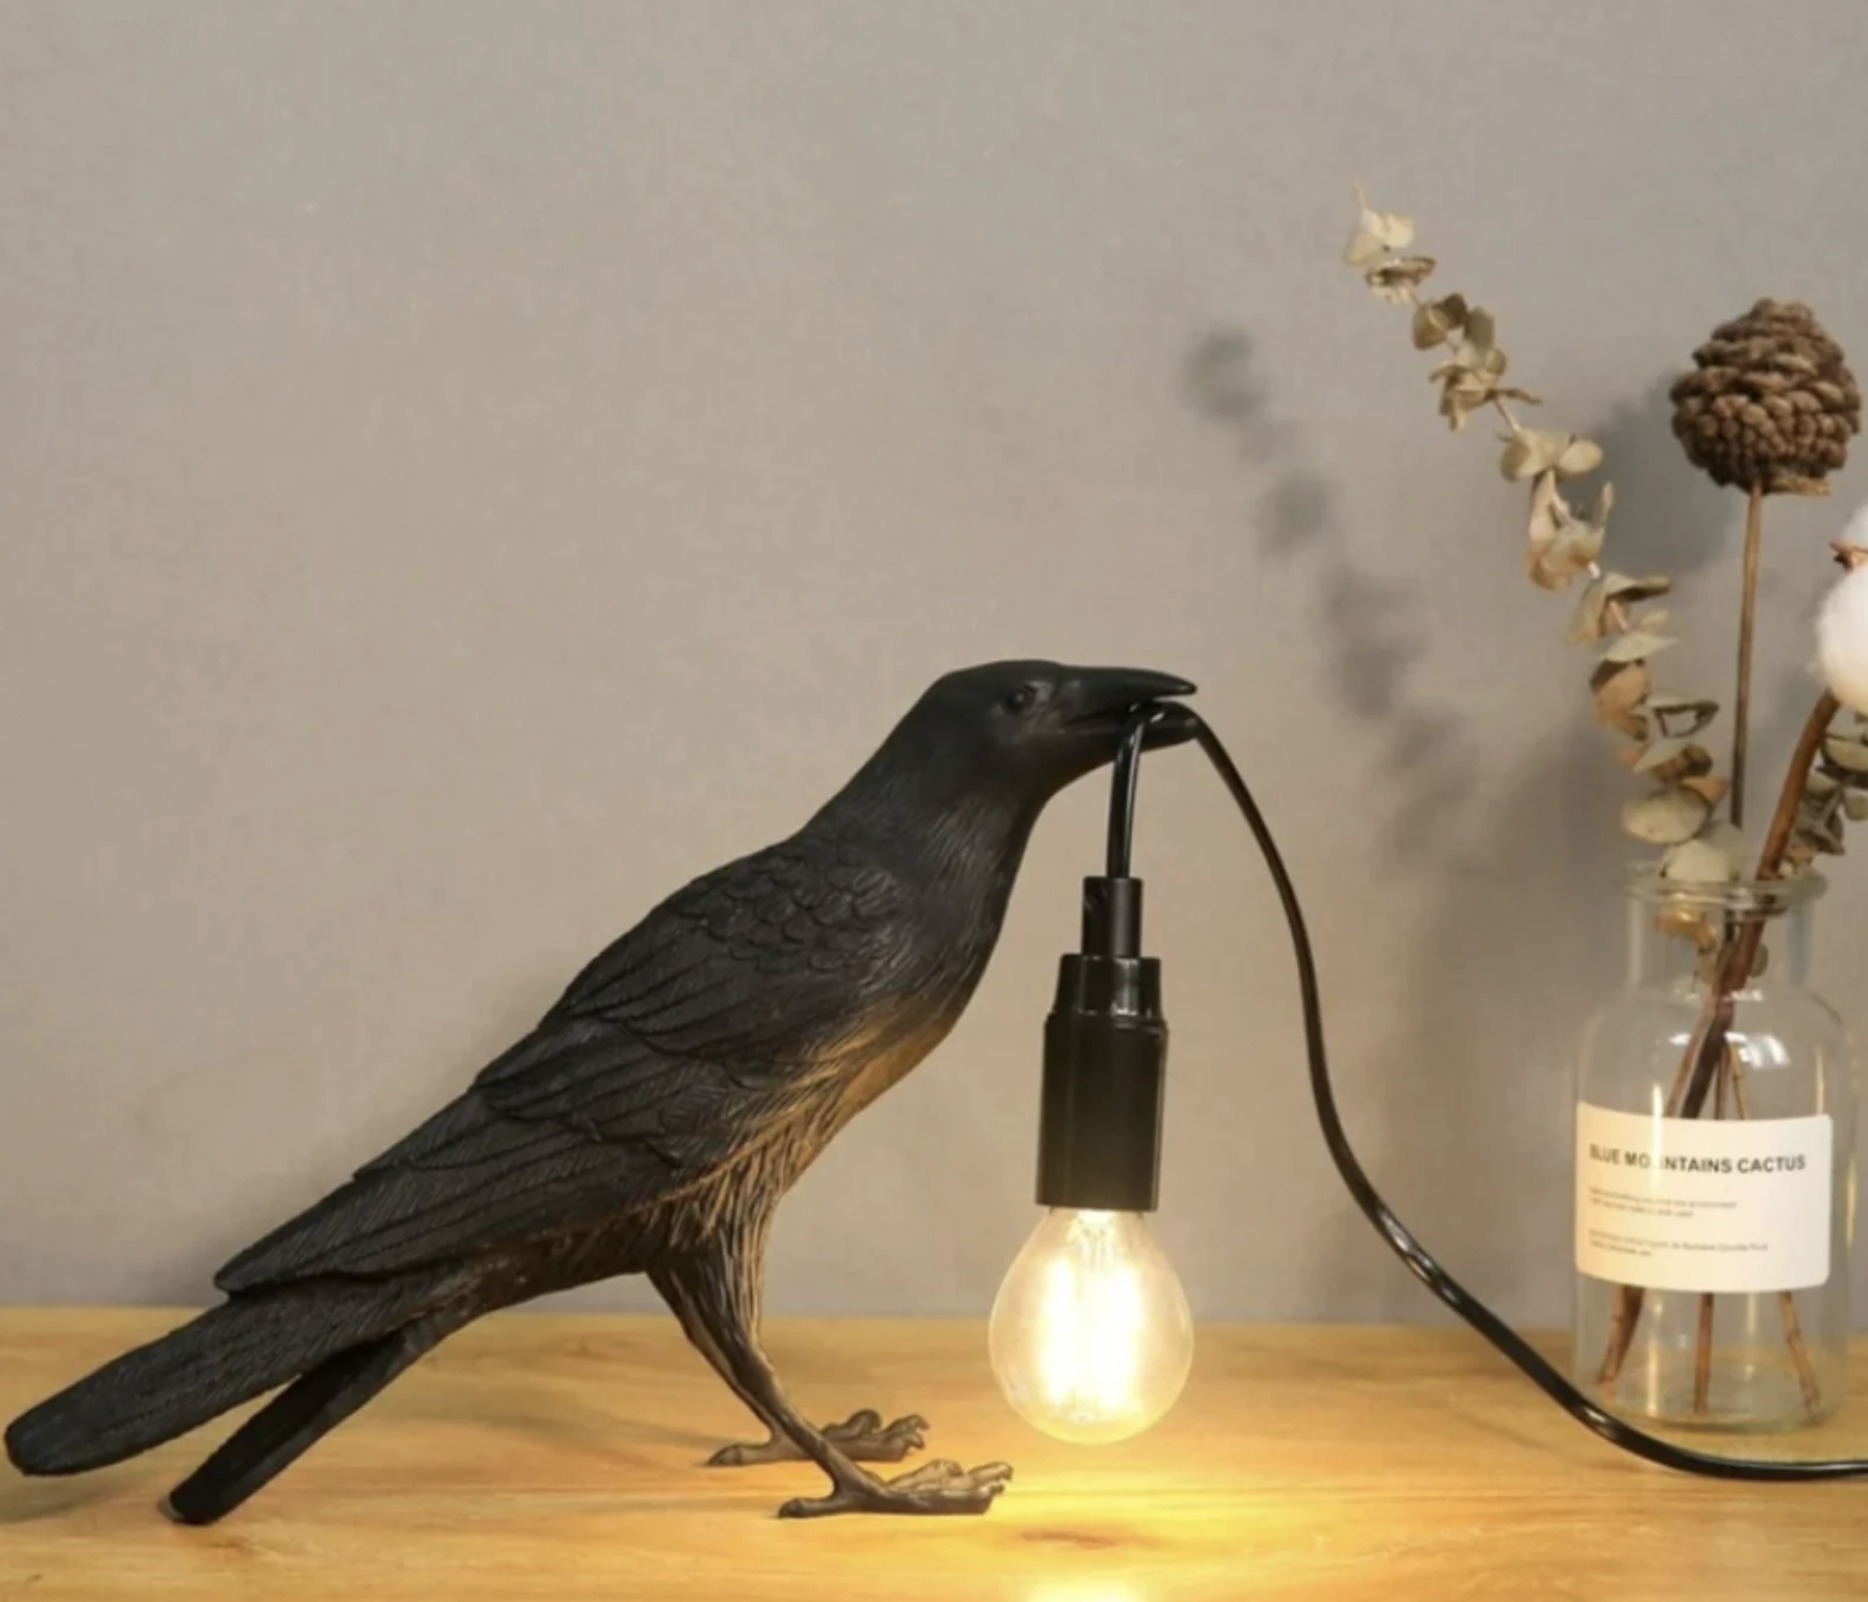 A black crow statue holding a lightbulb in its beak as a lamp.